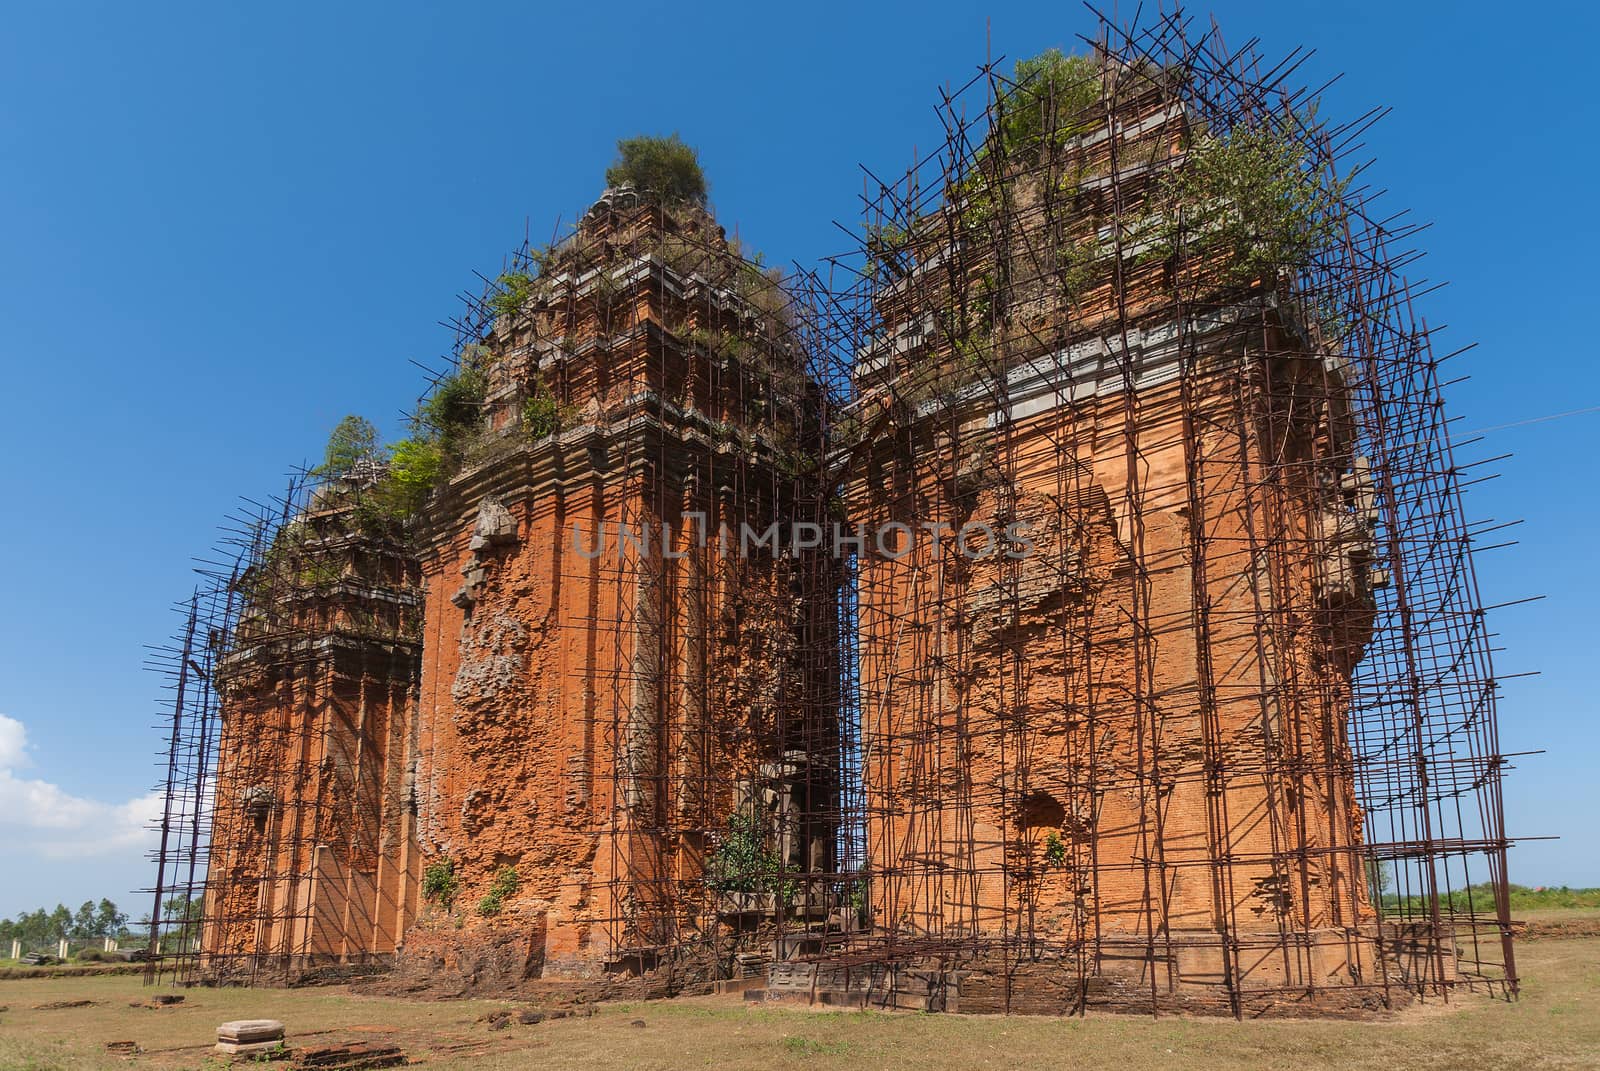 The three towers of Duong Long Cham towers in Vietnam. by Claudine